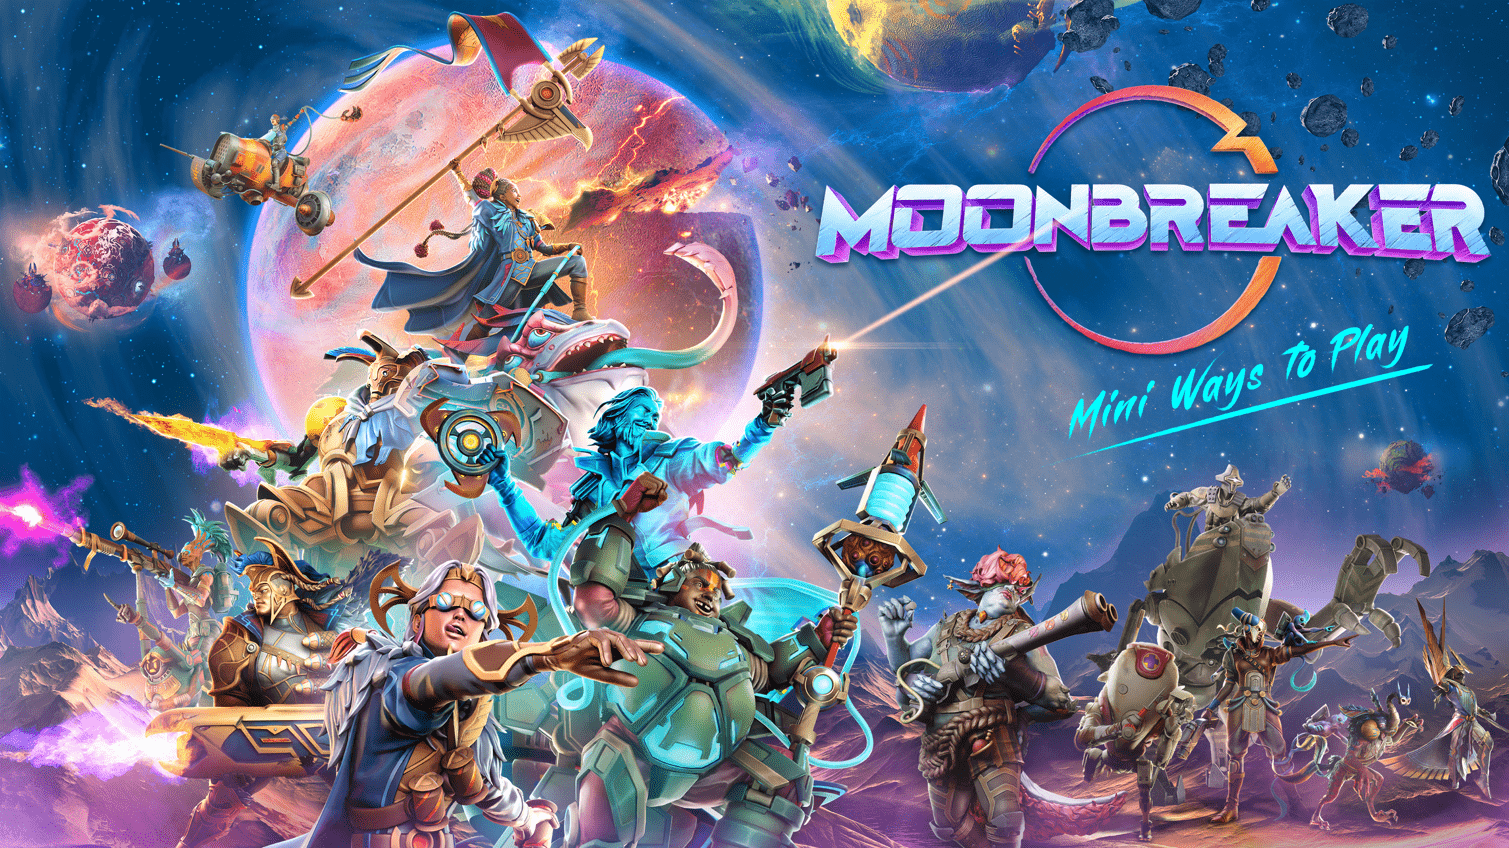 Gamescom '22 - Moonbreaker is the new game from the makers of Subnautica -  Finger Guns